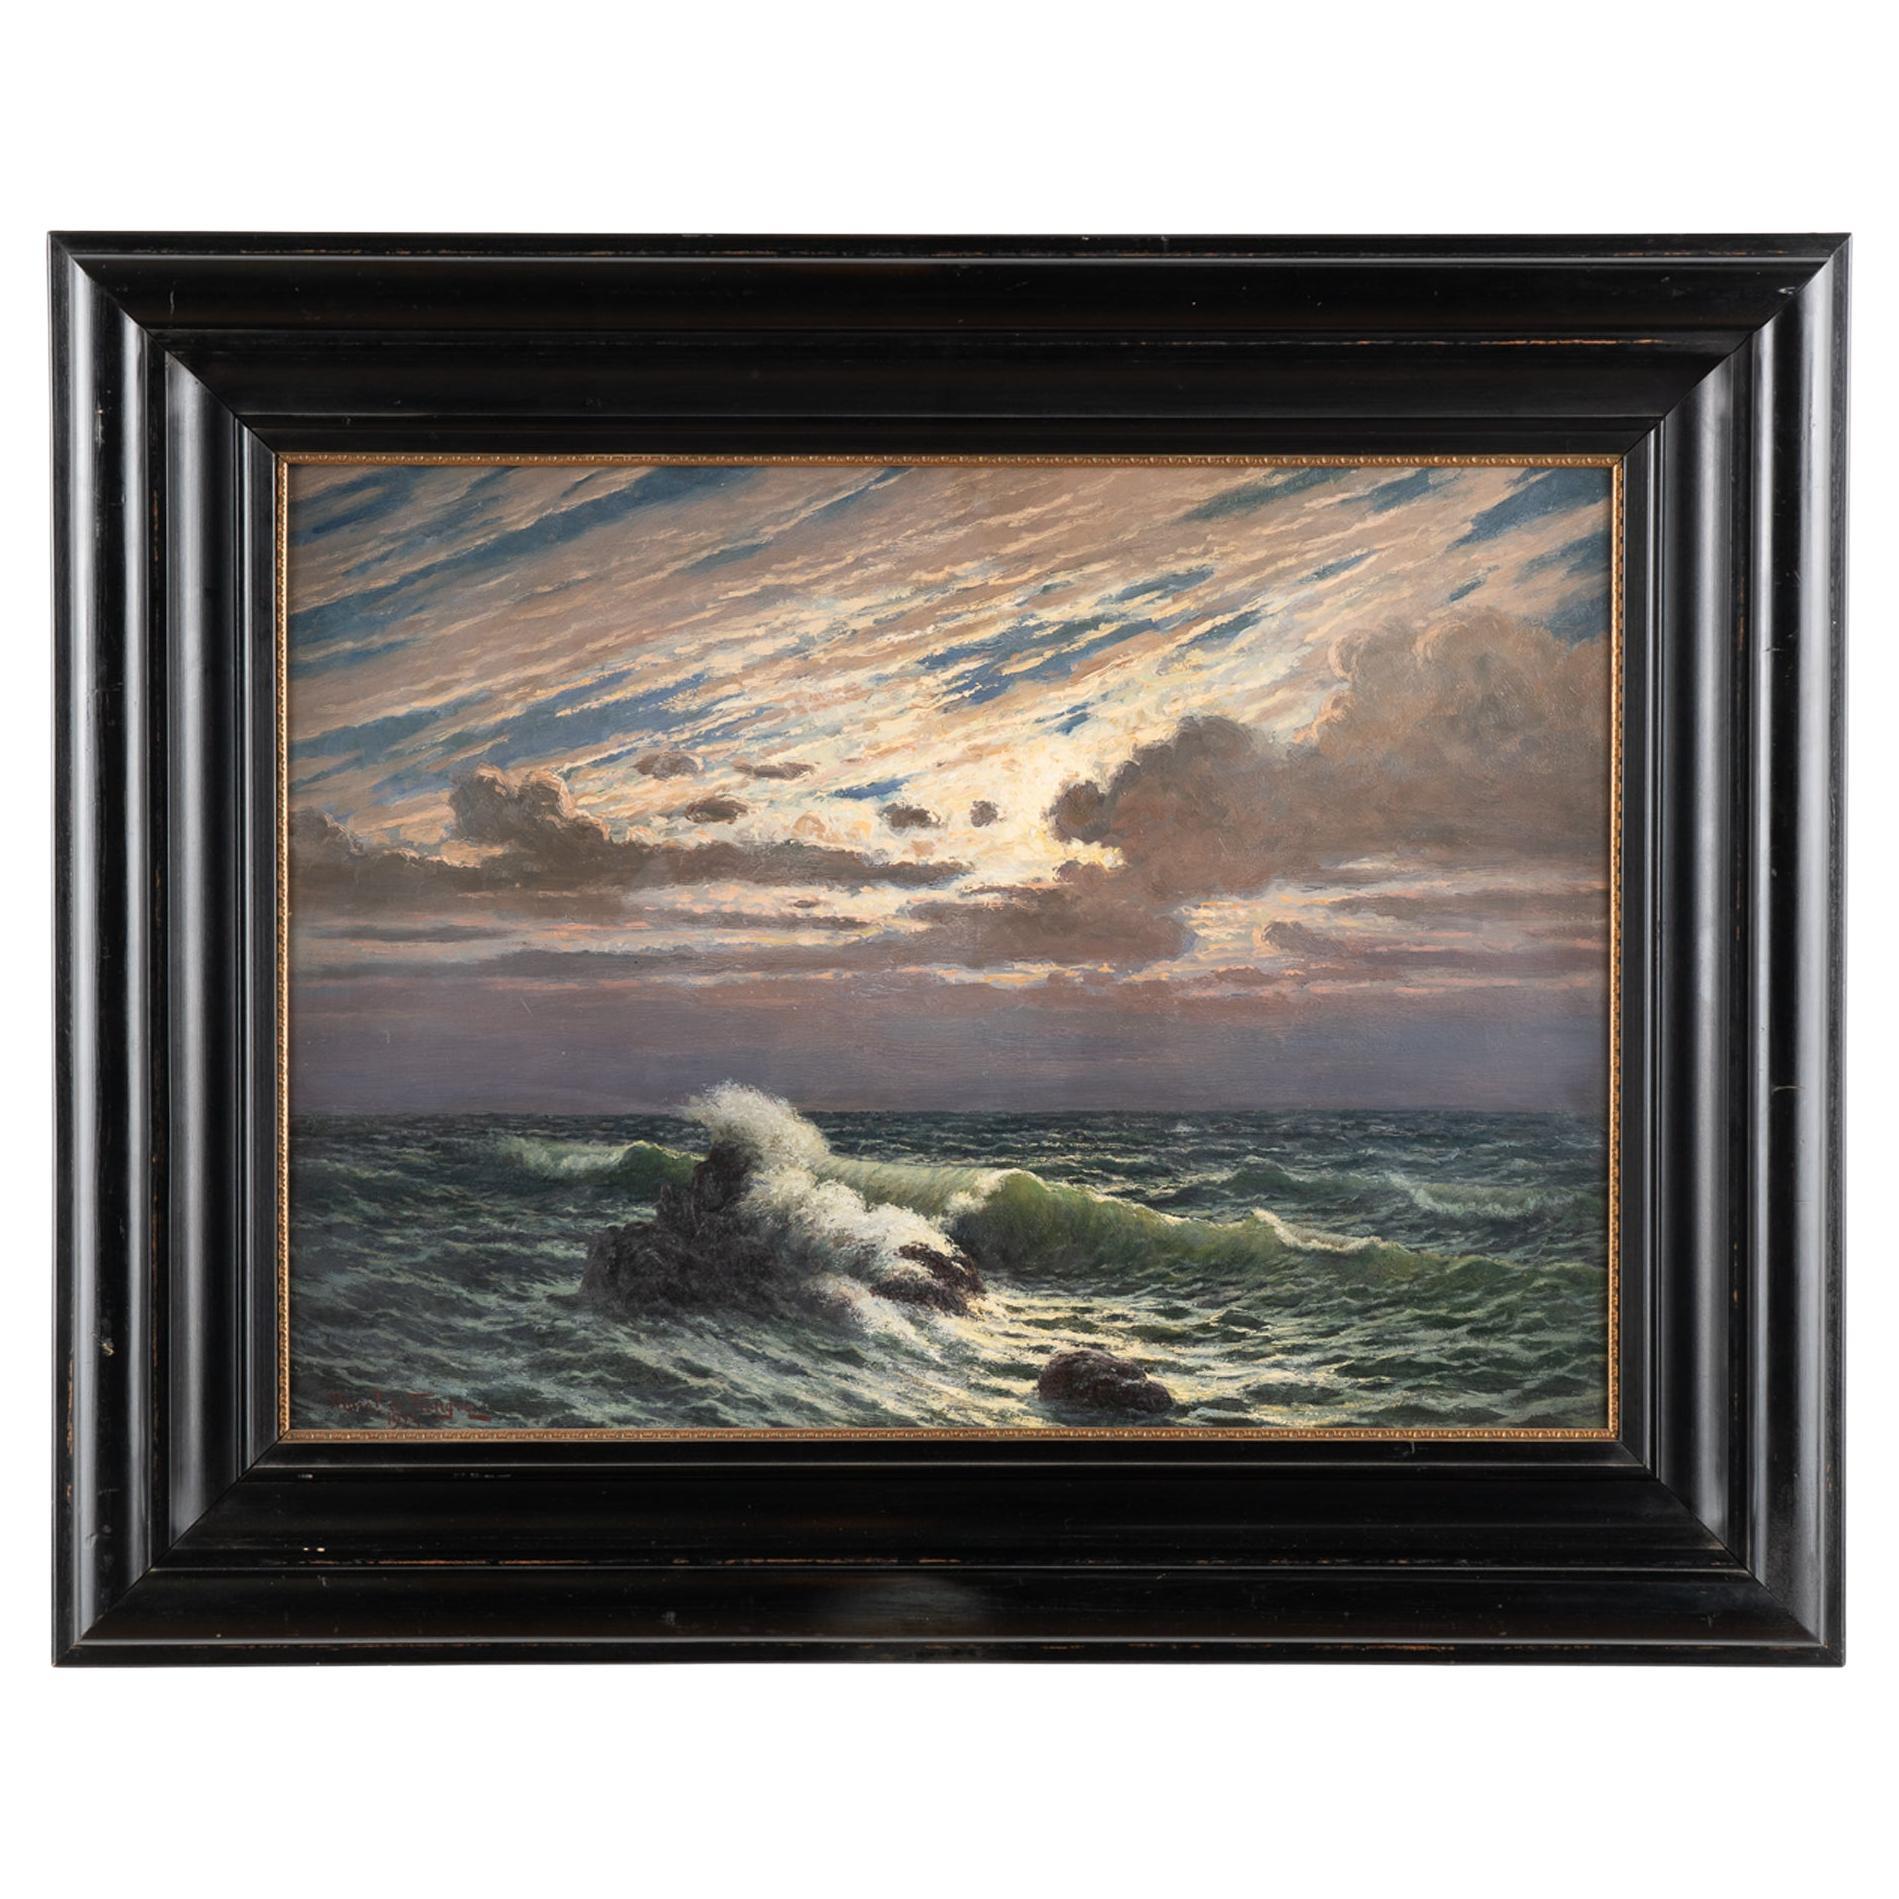 Oil on Canvas Painting of Moonlit Ocean Waves Signed, Dated Morel de Tanguy 1923